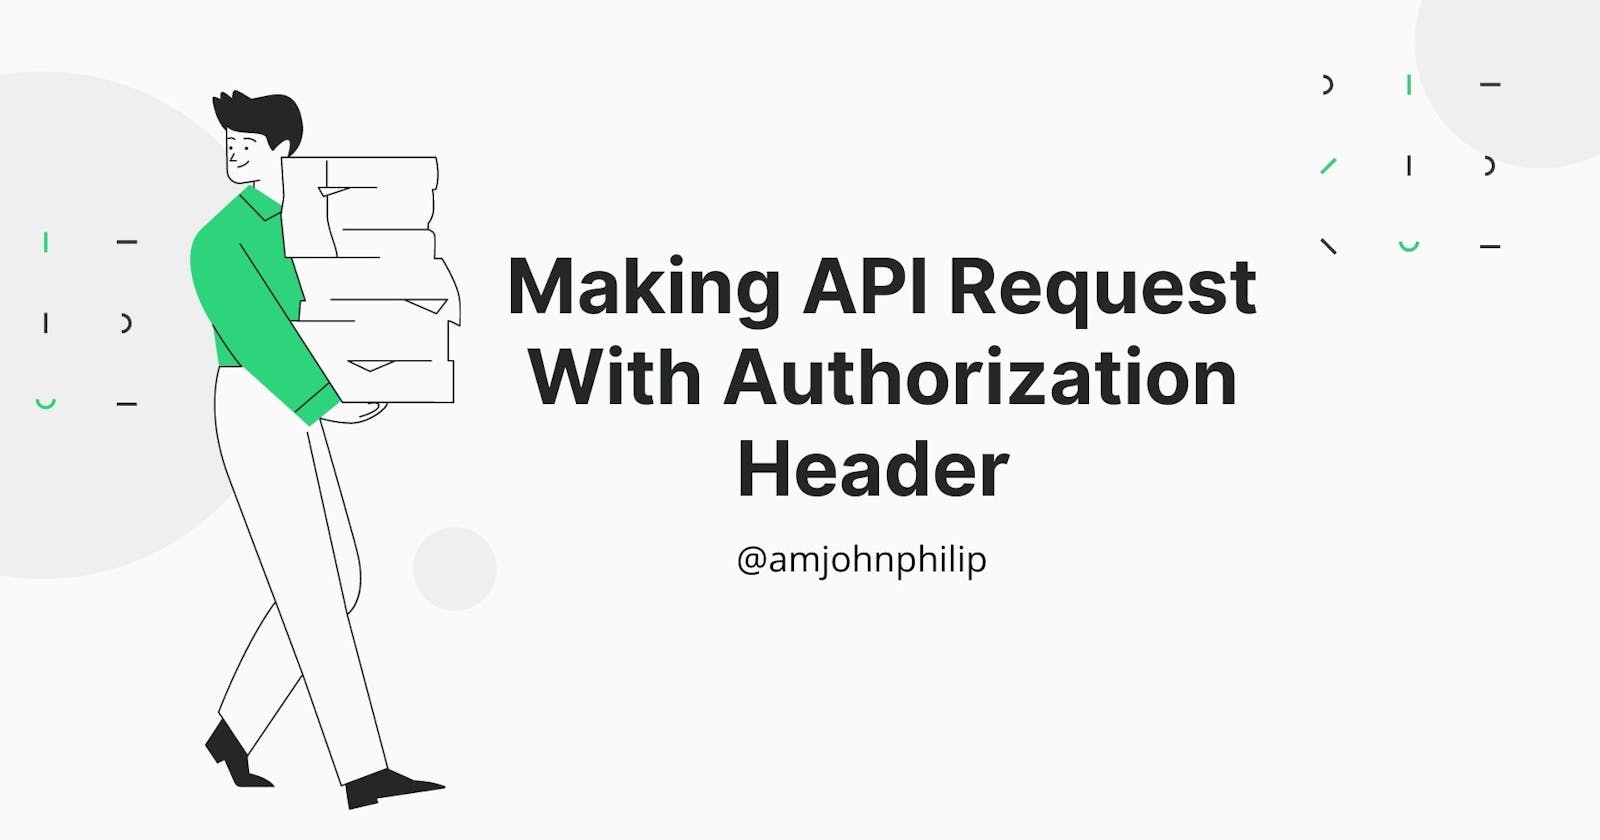 Making API Request With Authorization Header